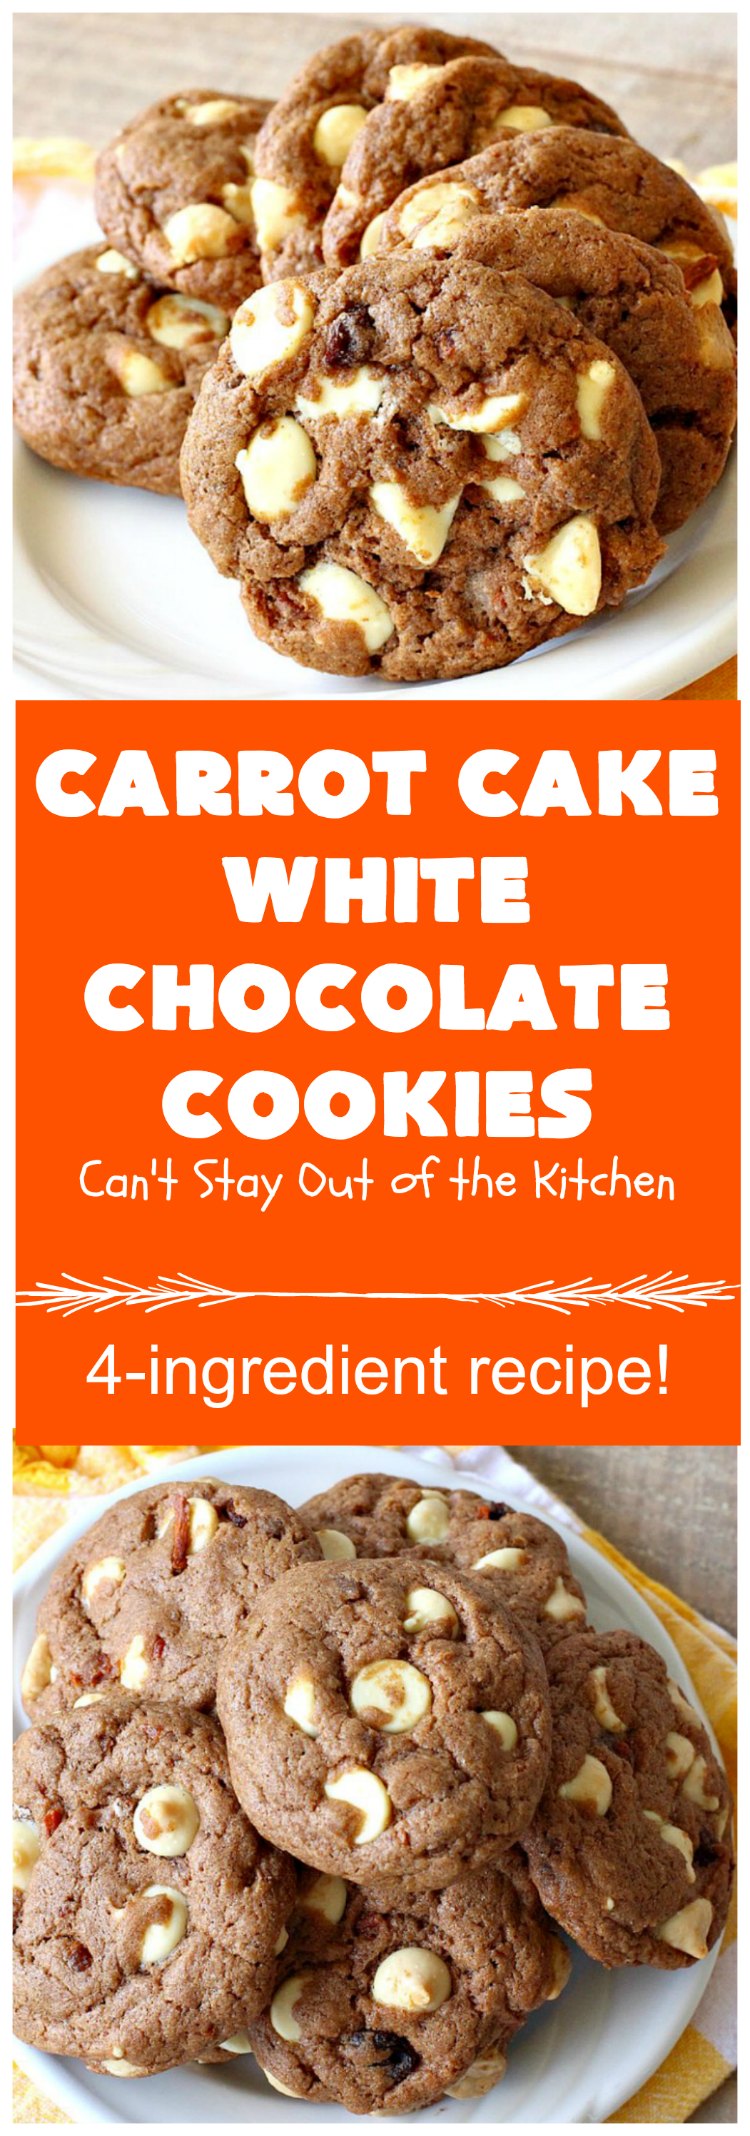 Carrot Cake White Chocolate Cookies | Can't Stay Out of the Kitchen